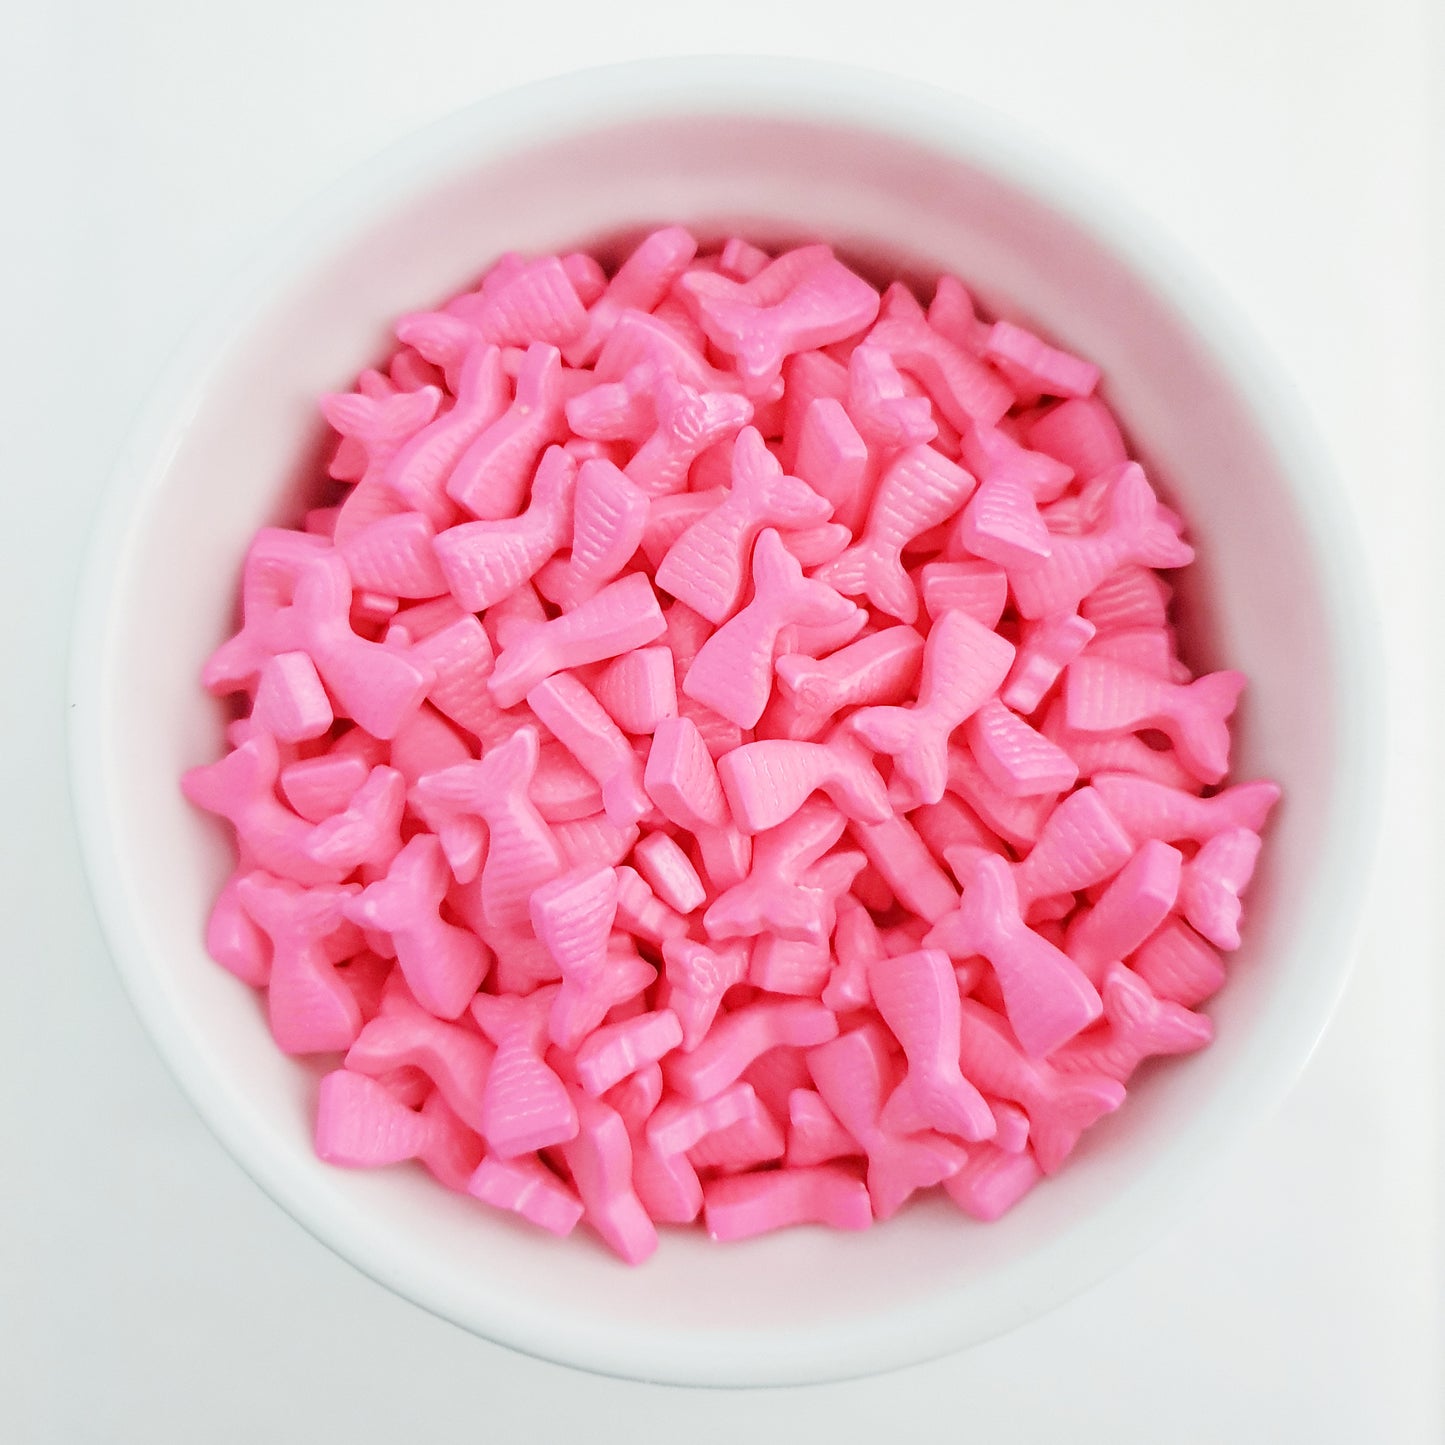 Mermaid Tail Shaped Candy Sprinkles/Quins